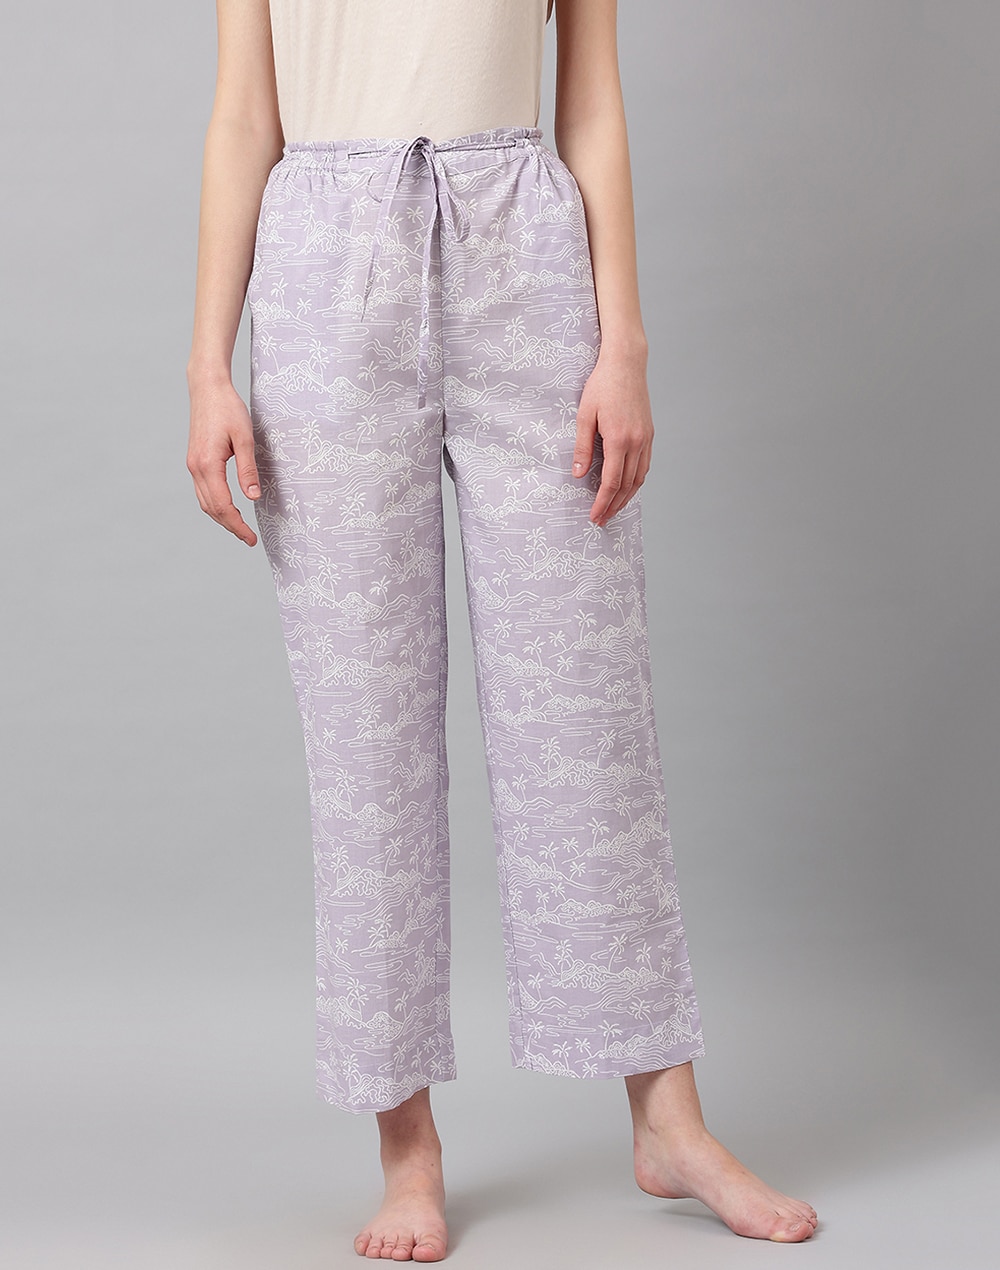 Printed 5031-Girls Pyjama Pants with 2 Pockets at Rs 210/piece in Ahmedabad